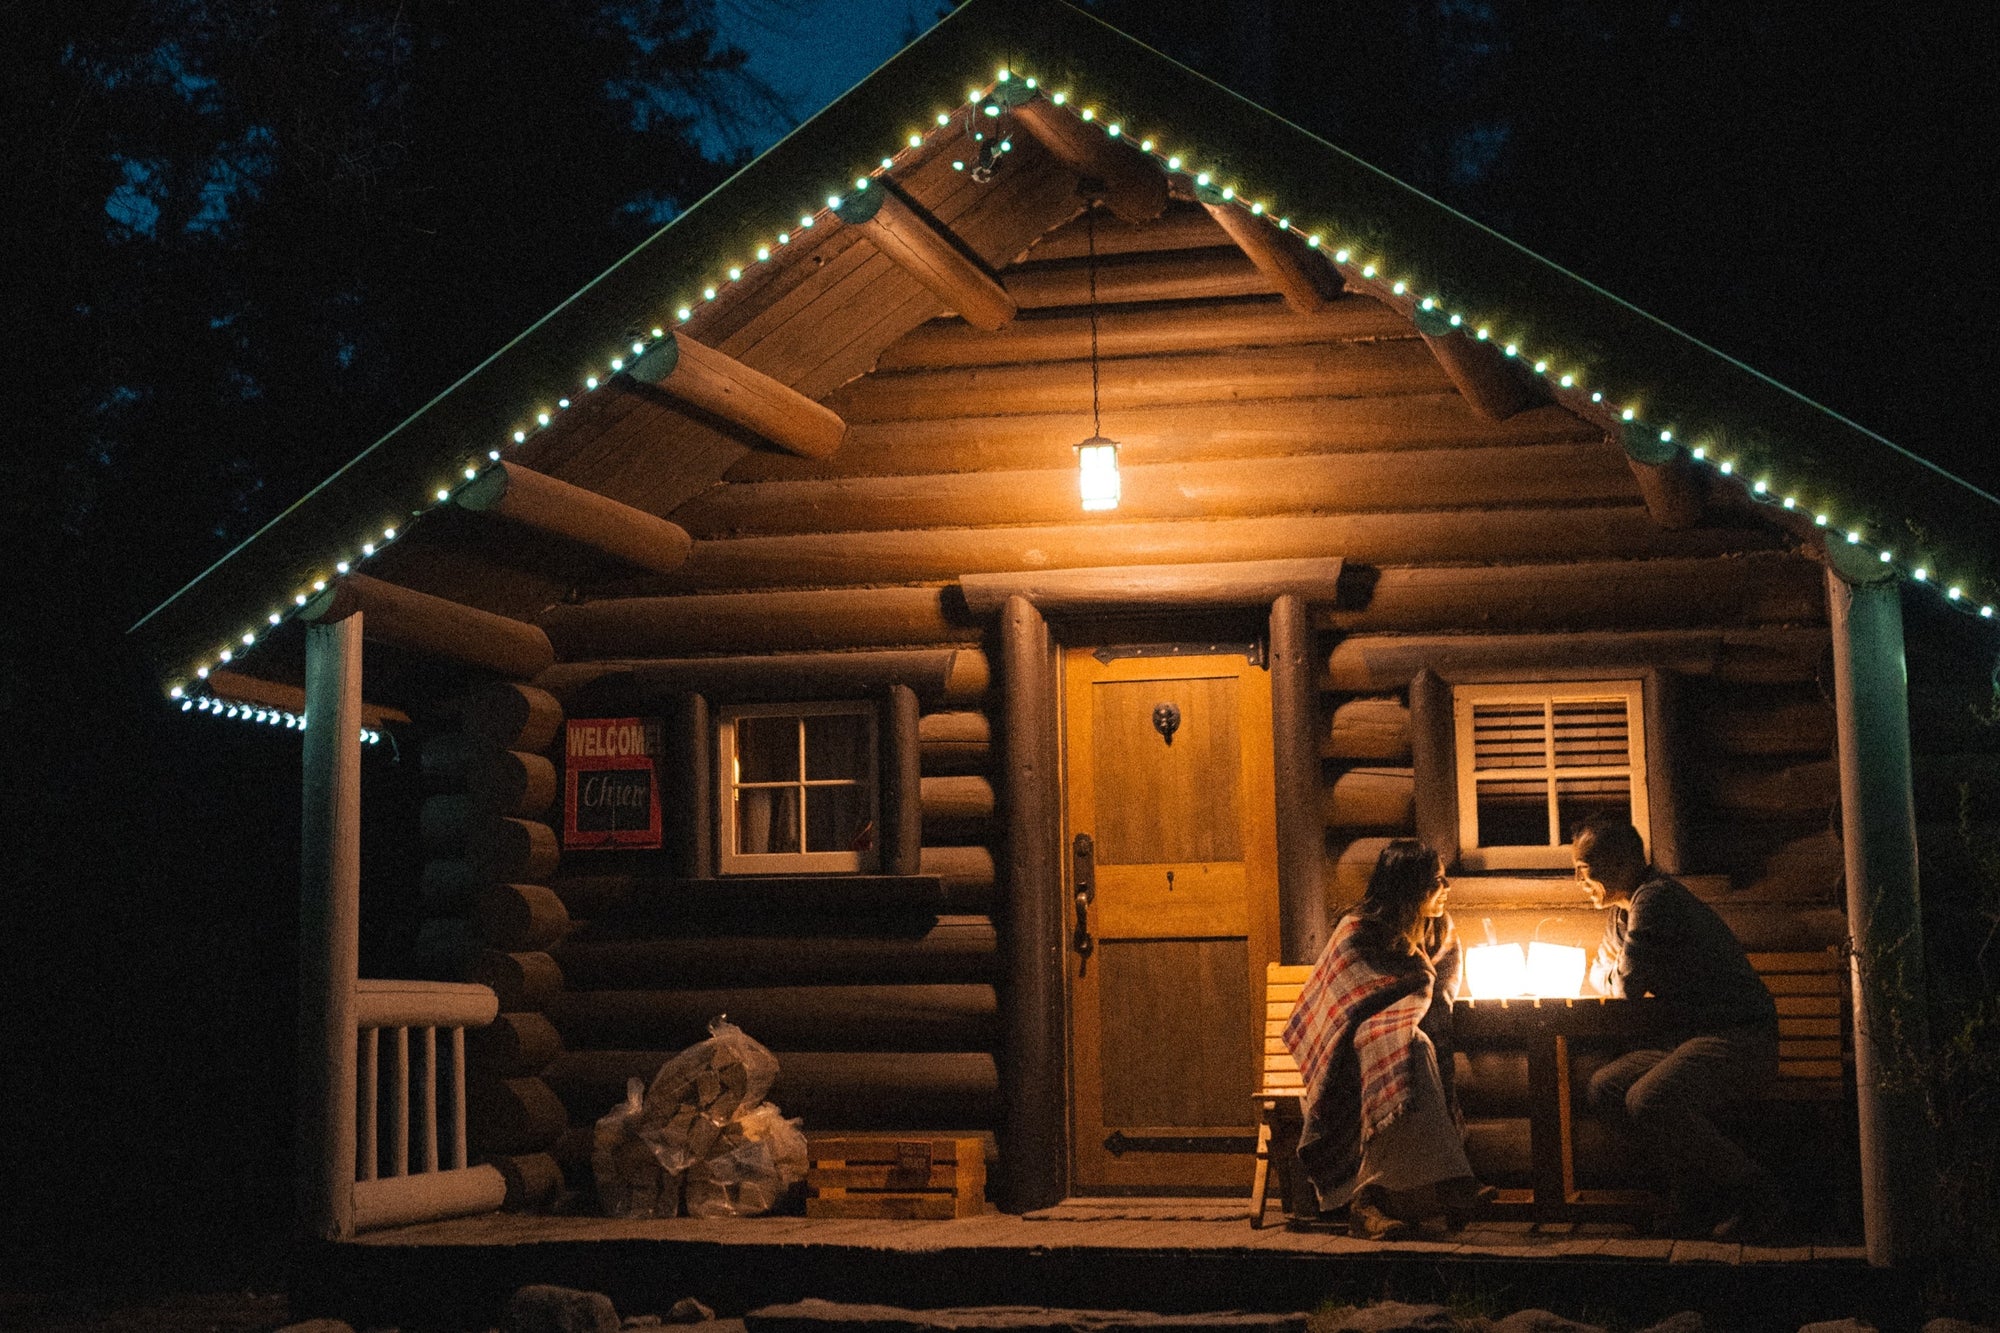 Two people sitting with LuminAID Lanterns by a log cabin. Source: @Dawnpointstudios